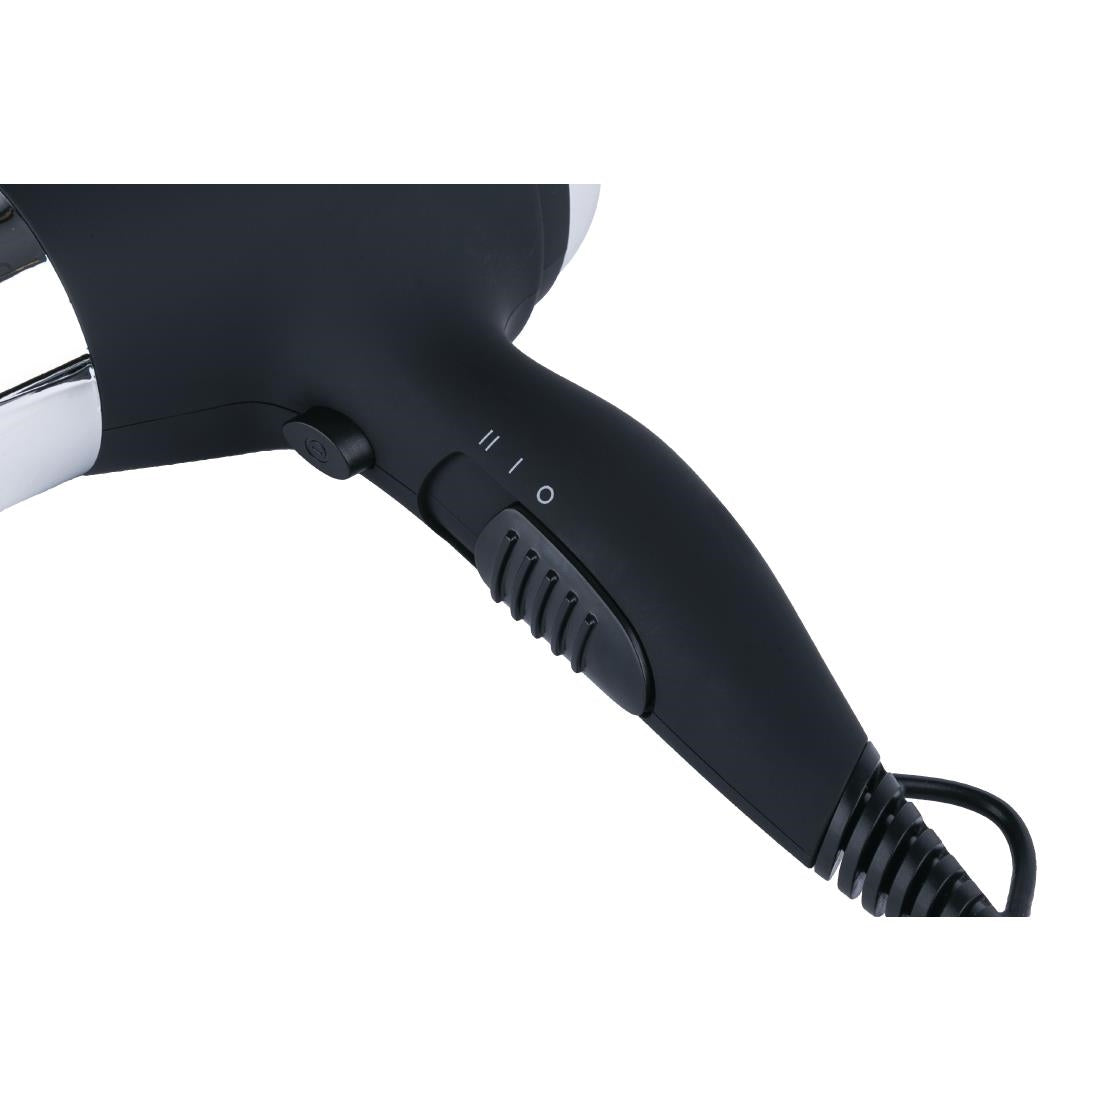 Deluxe Black and Chrome Hairdryer 1800W JD Catering Equipment Solutions Ltd